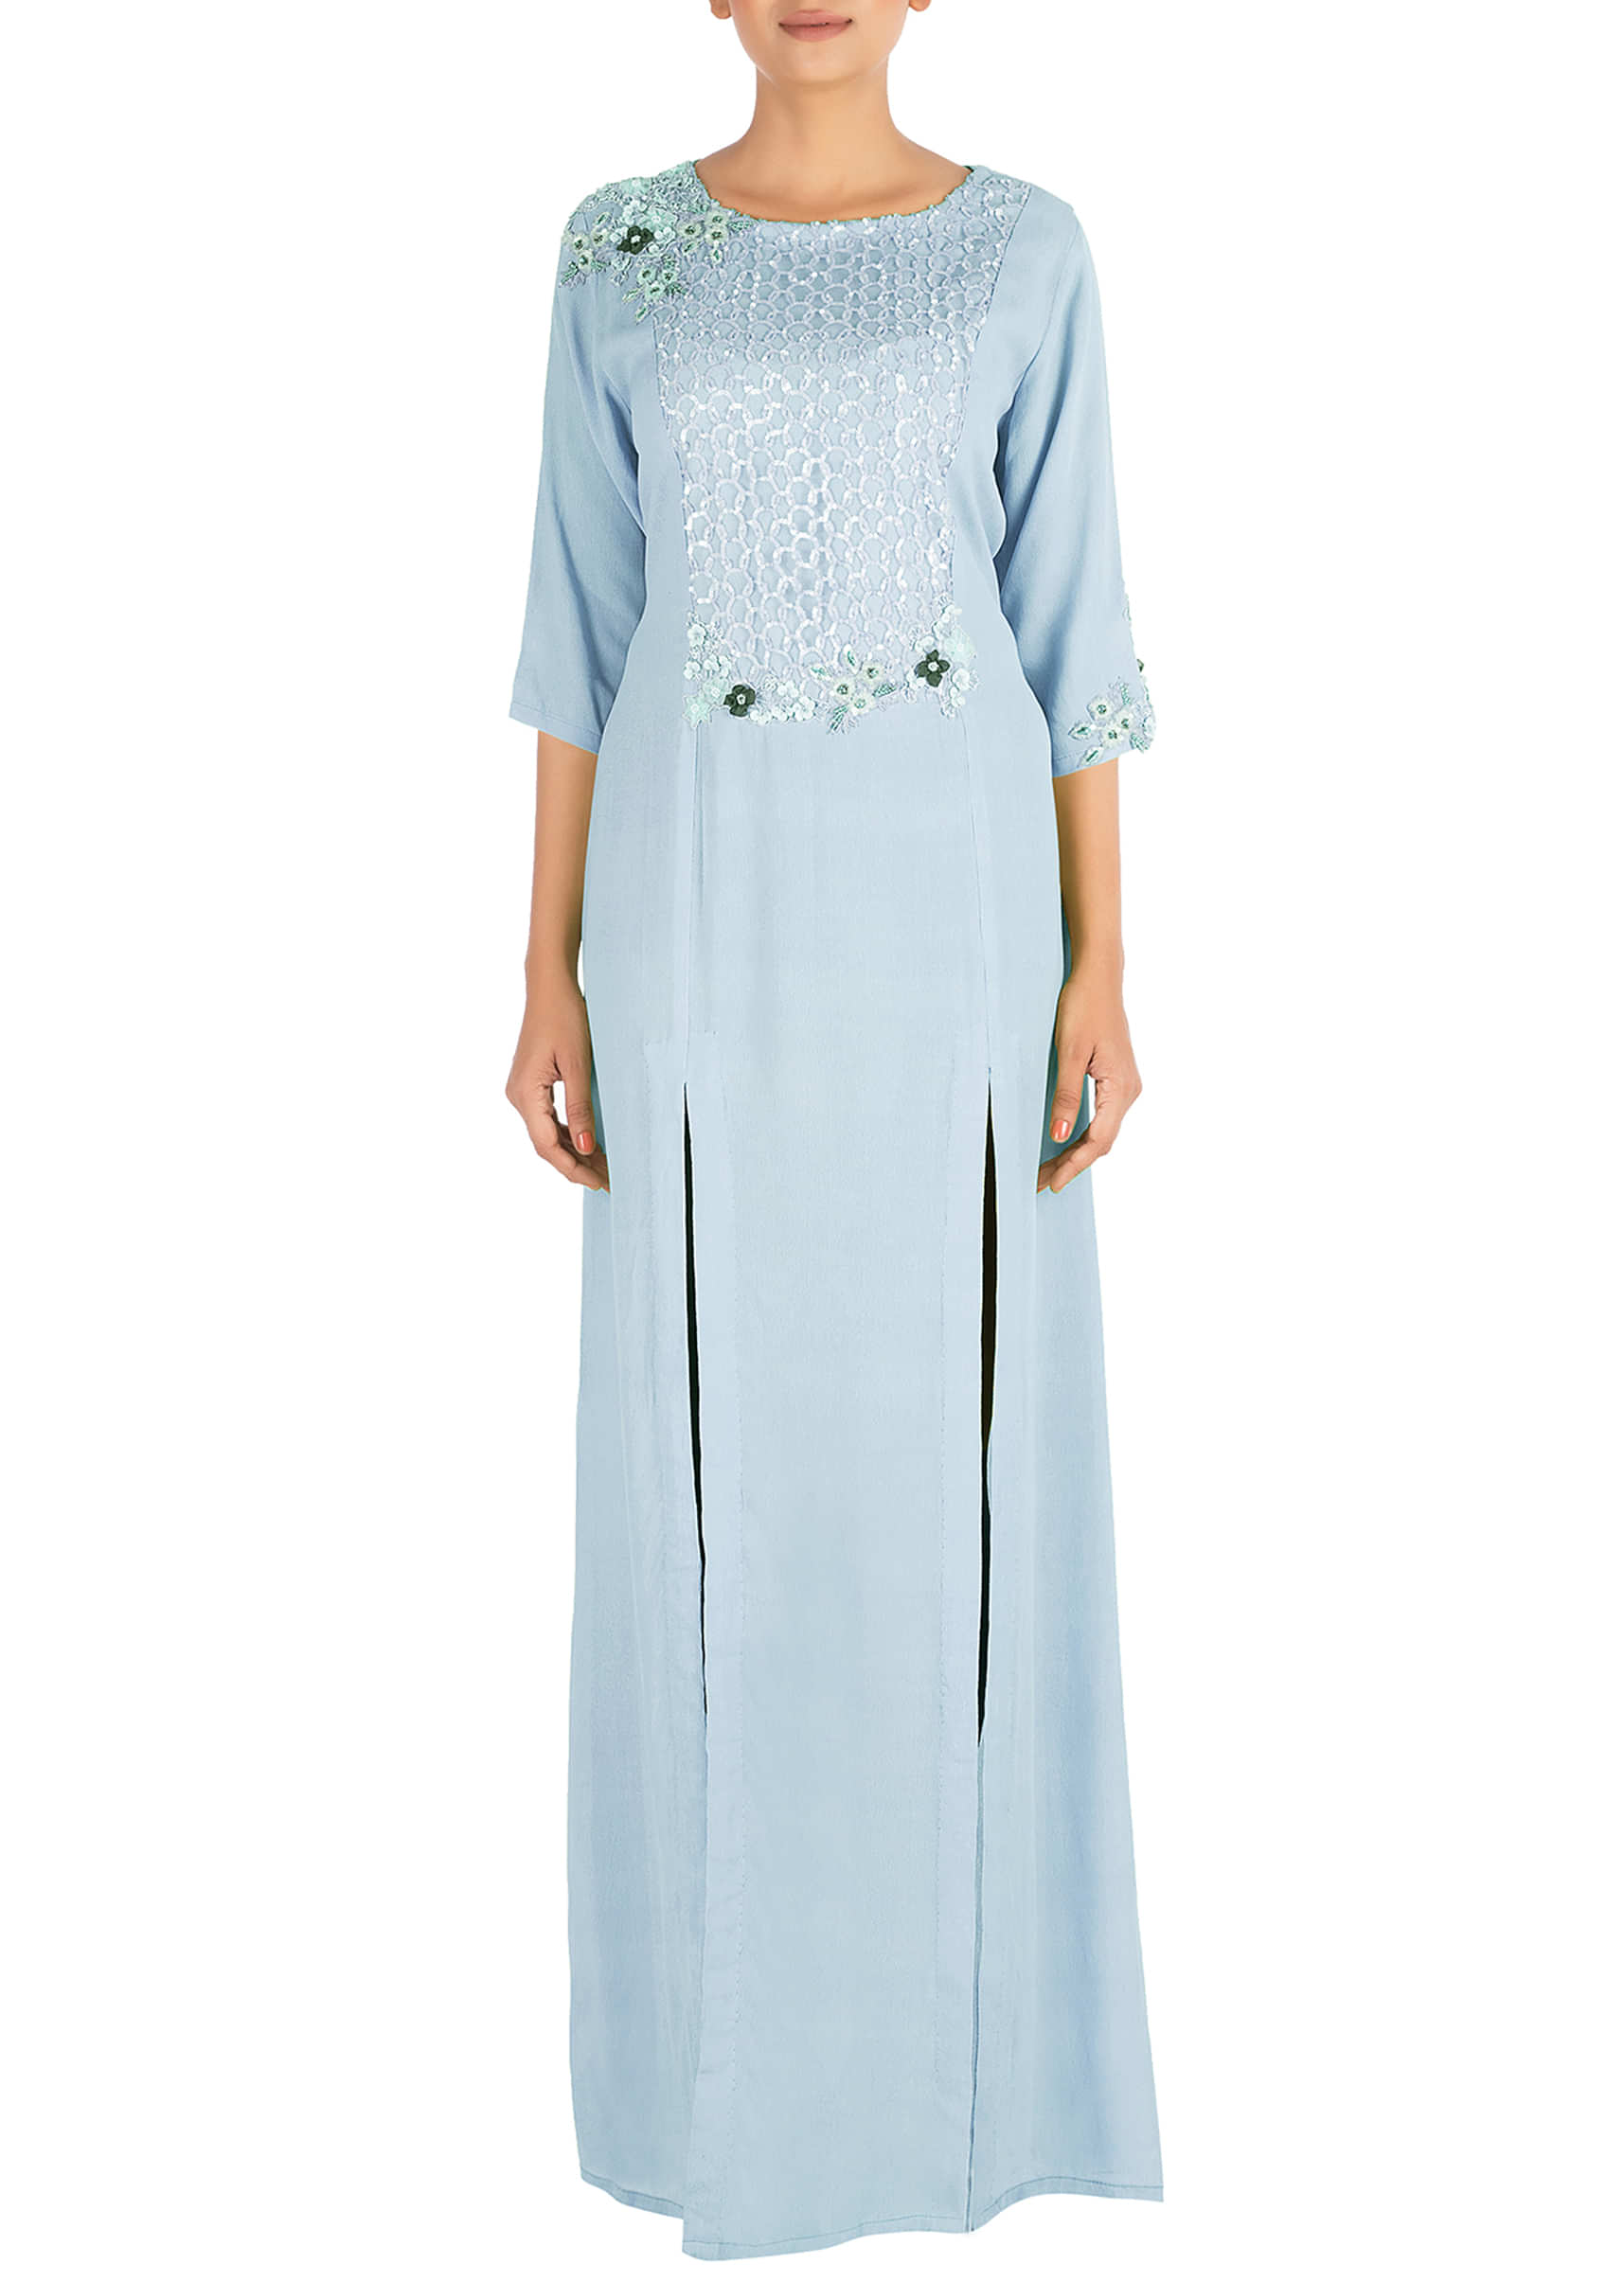 Hand Embroidered Powder Blue Long Tunic With Front Slits